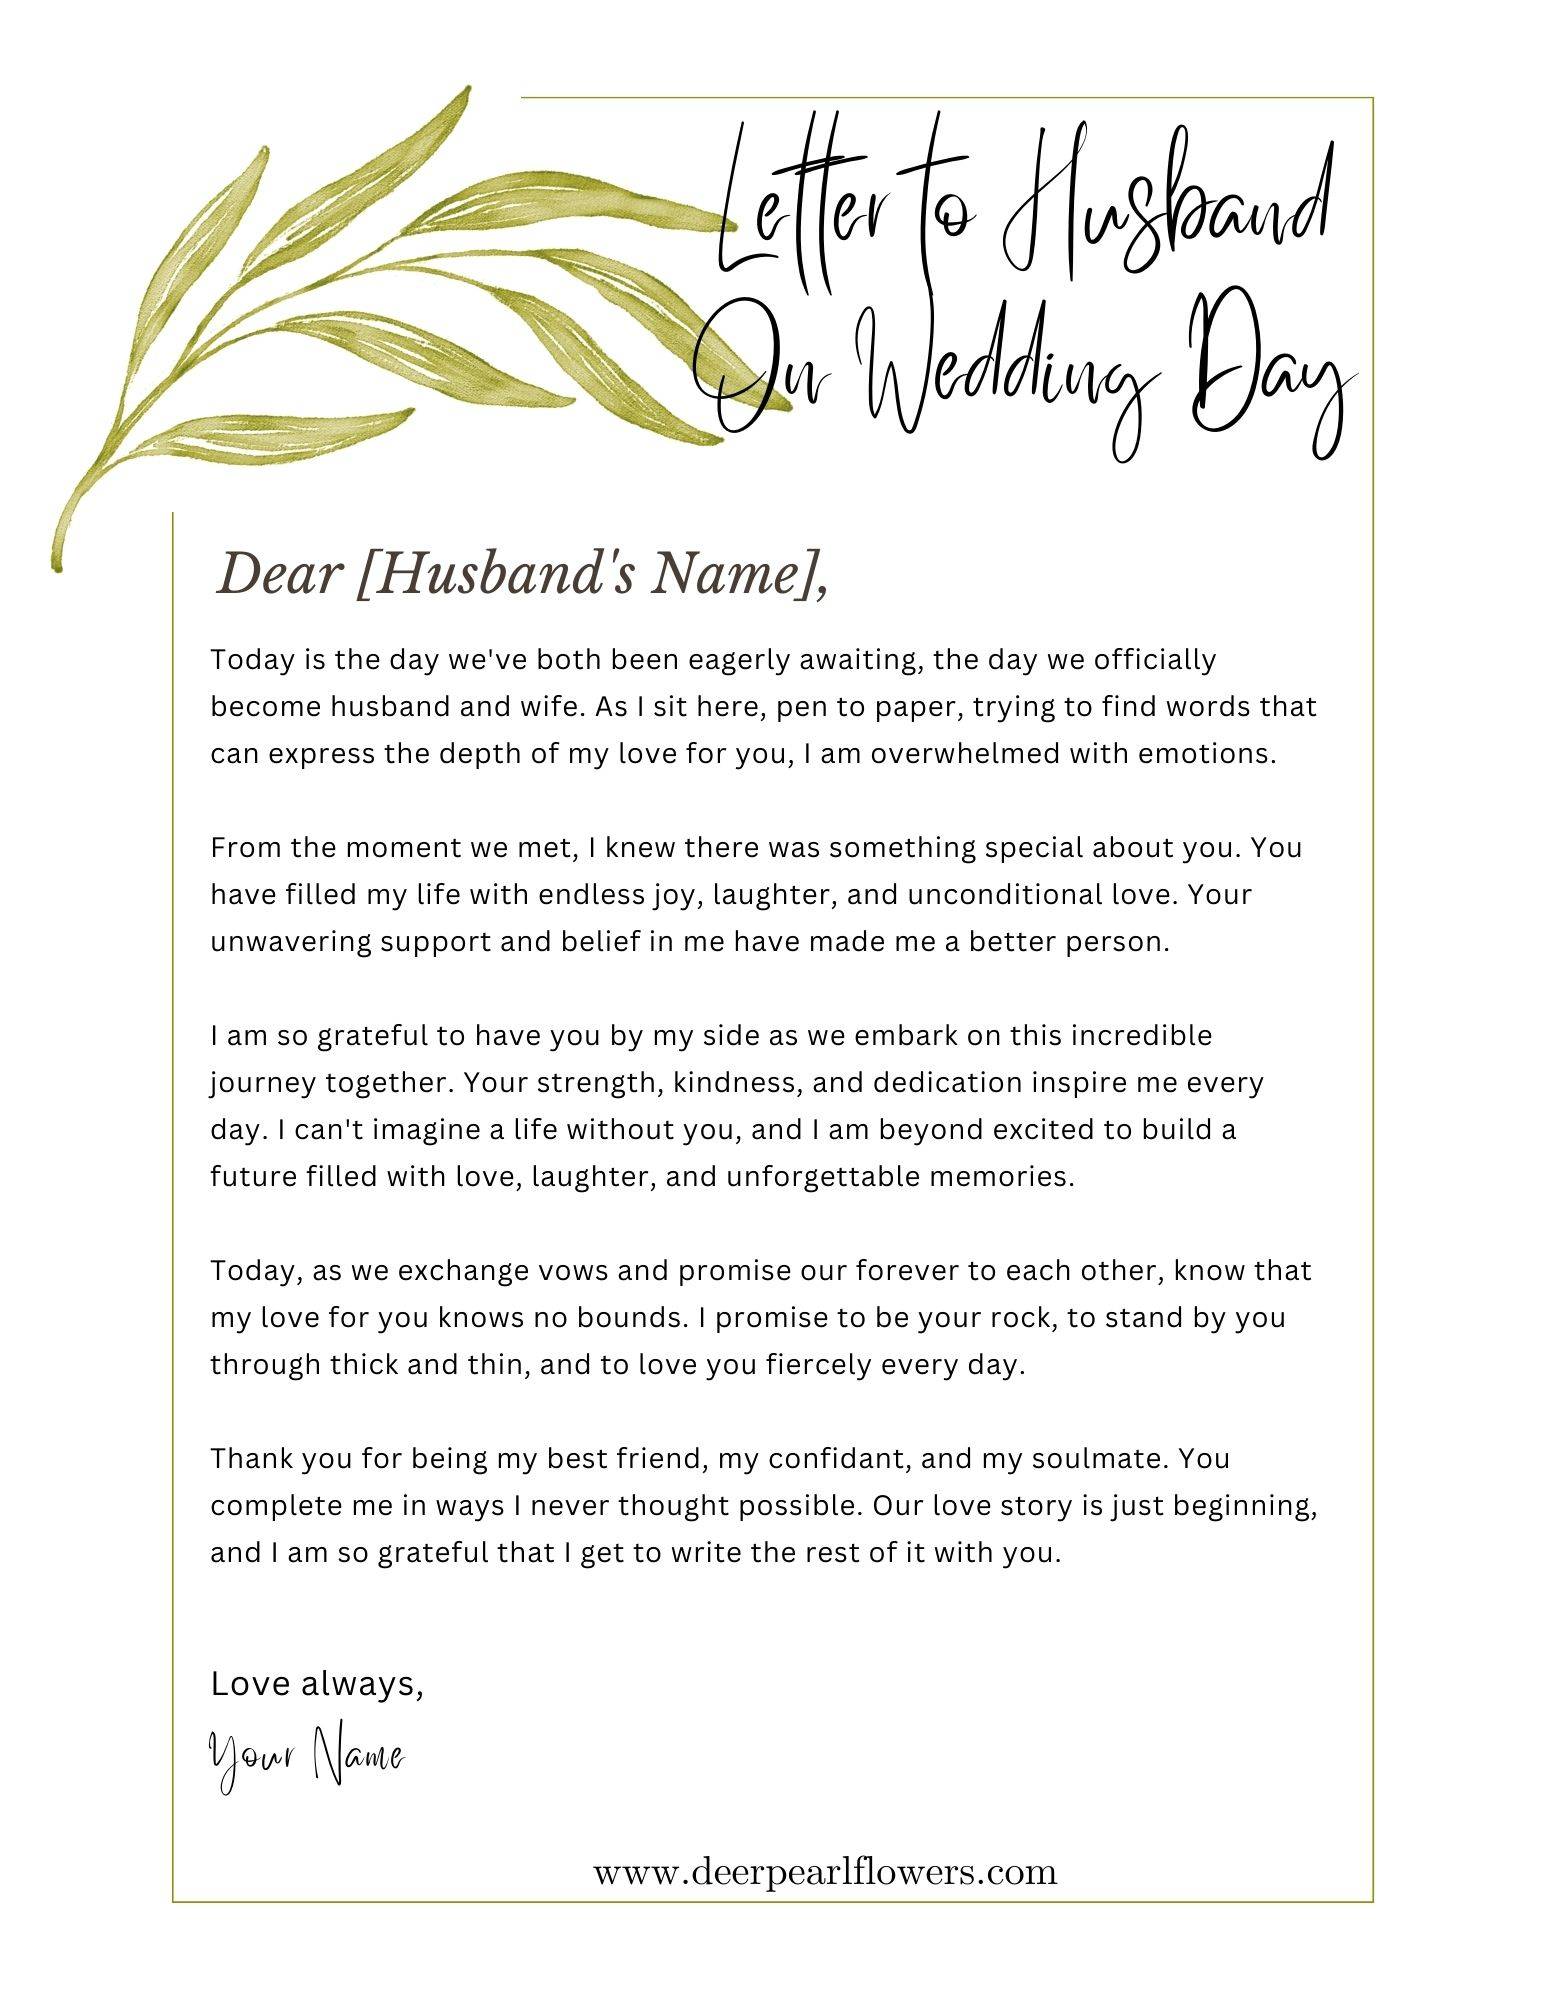 Letter to Husband On Wedding Day Example